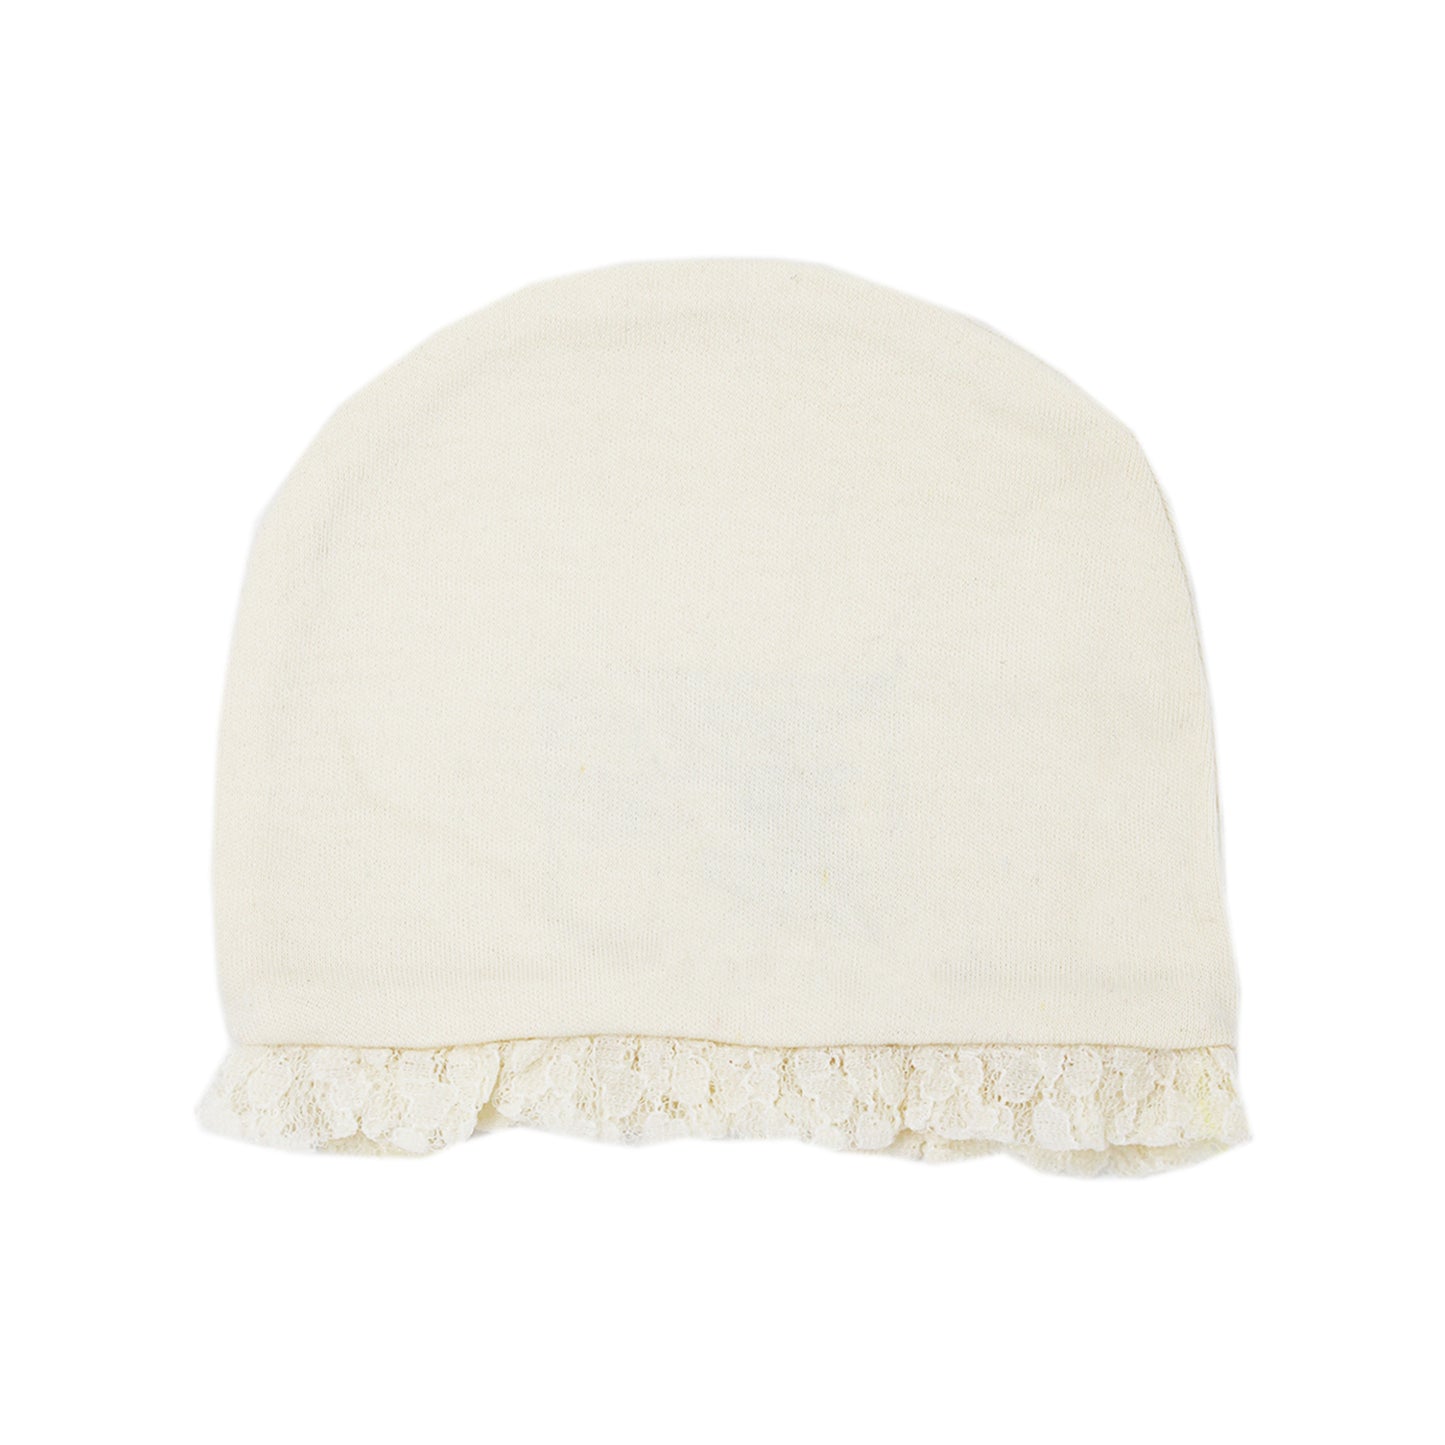 L'Oved Baby OR374 Organic Lace Ruffle Cap